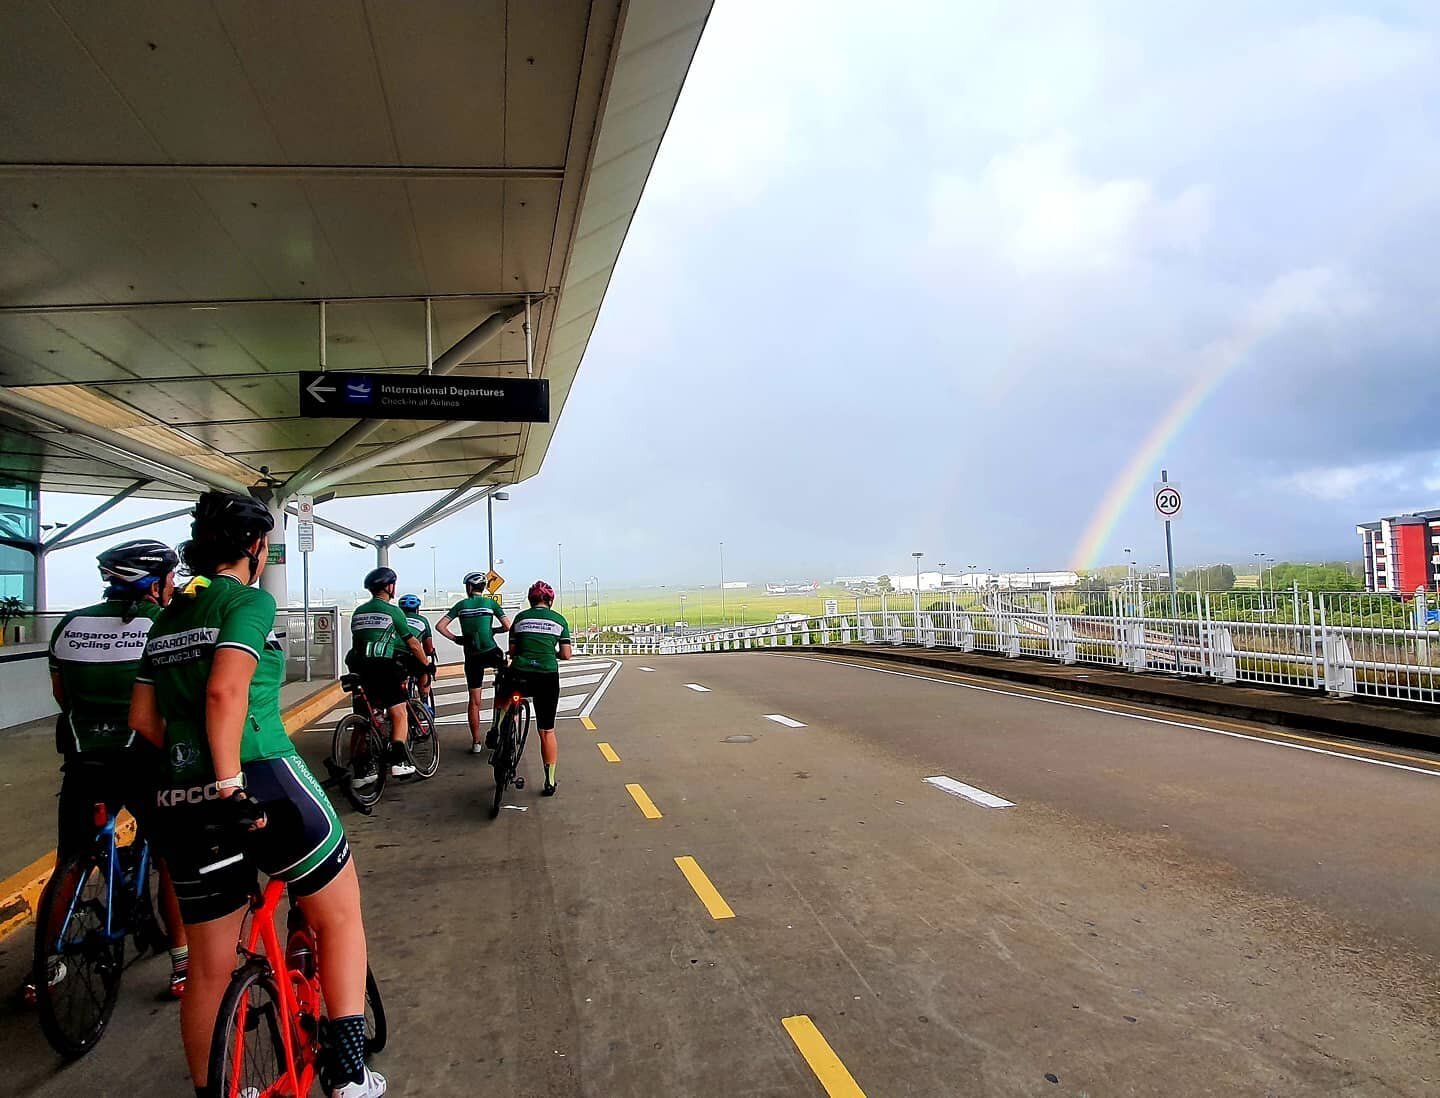 Chasing rainbow's after the rain. Cross fingers for a dry weekend with some racing and riding with KPCC clubmates! #clublife #greenwhiteblack #kangaroopointcc #happyFriYay #championsystems